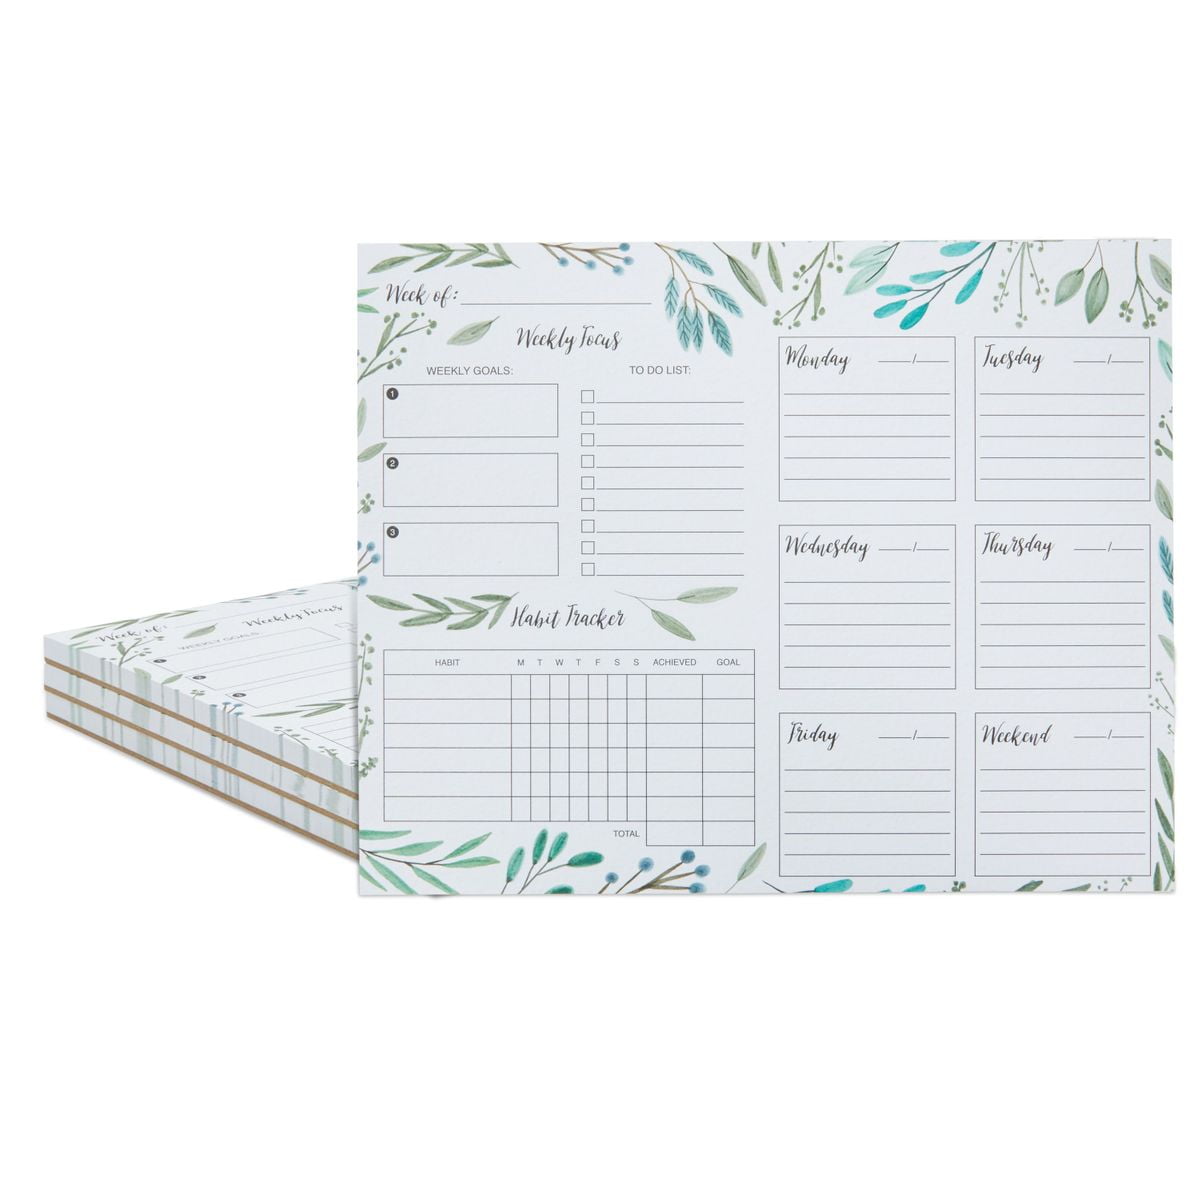 Daily Planner Desk Organiser To do list Schedule Meal Planner A4 loose sheets